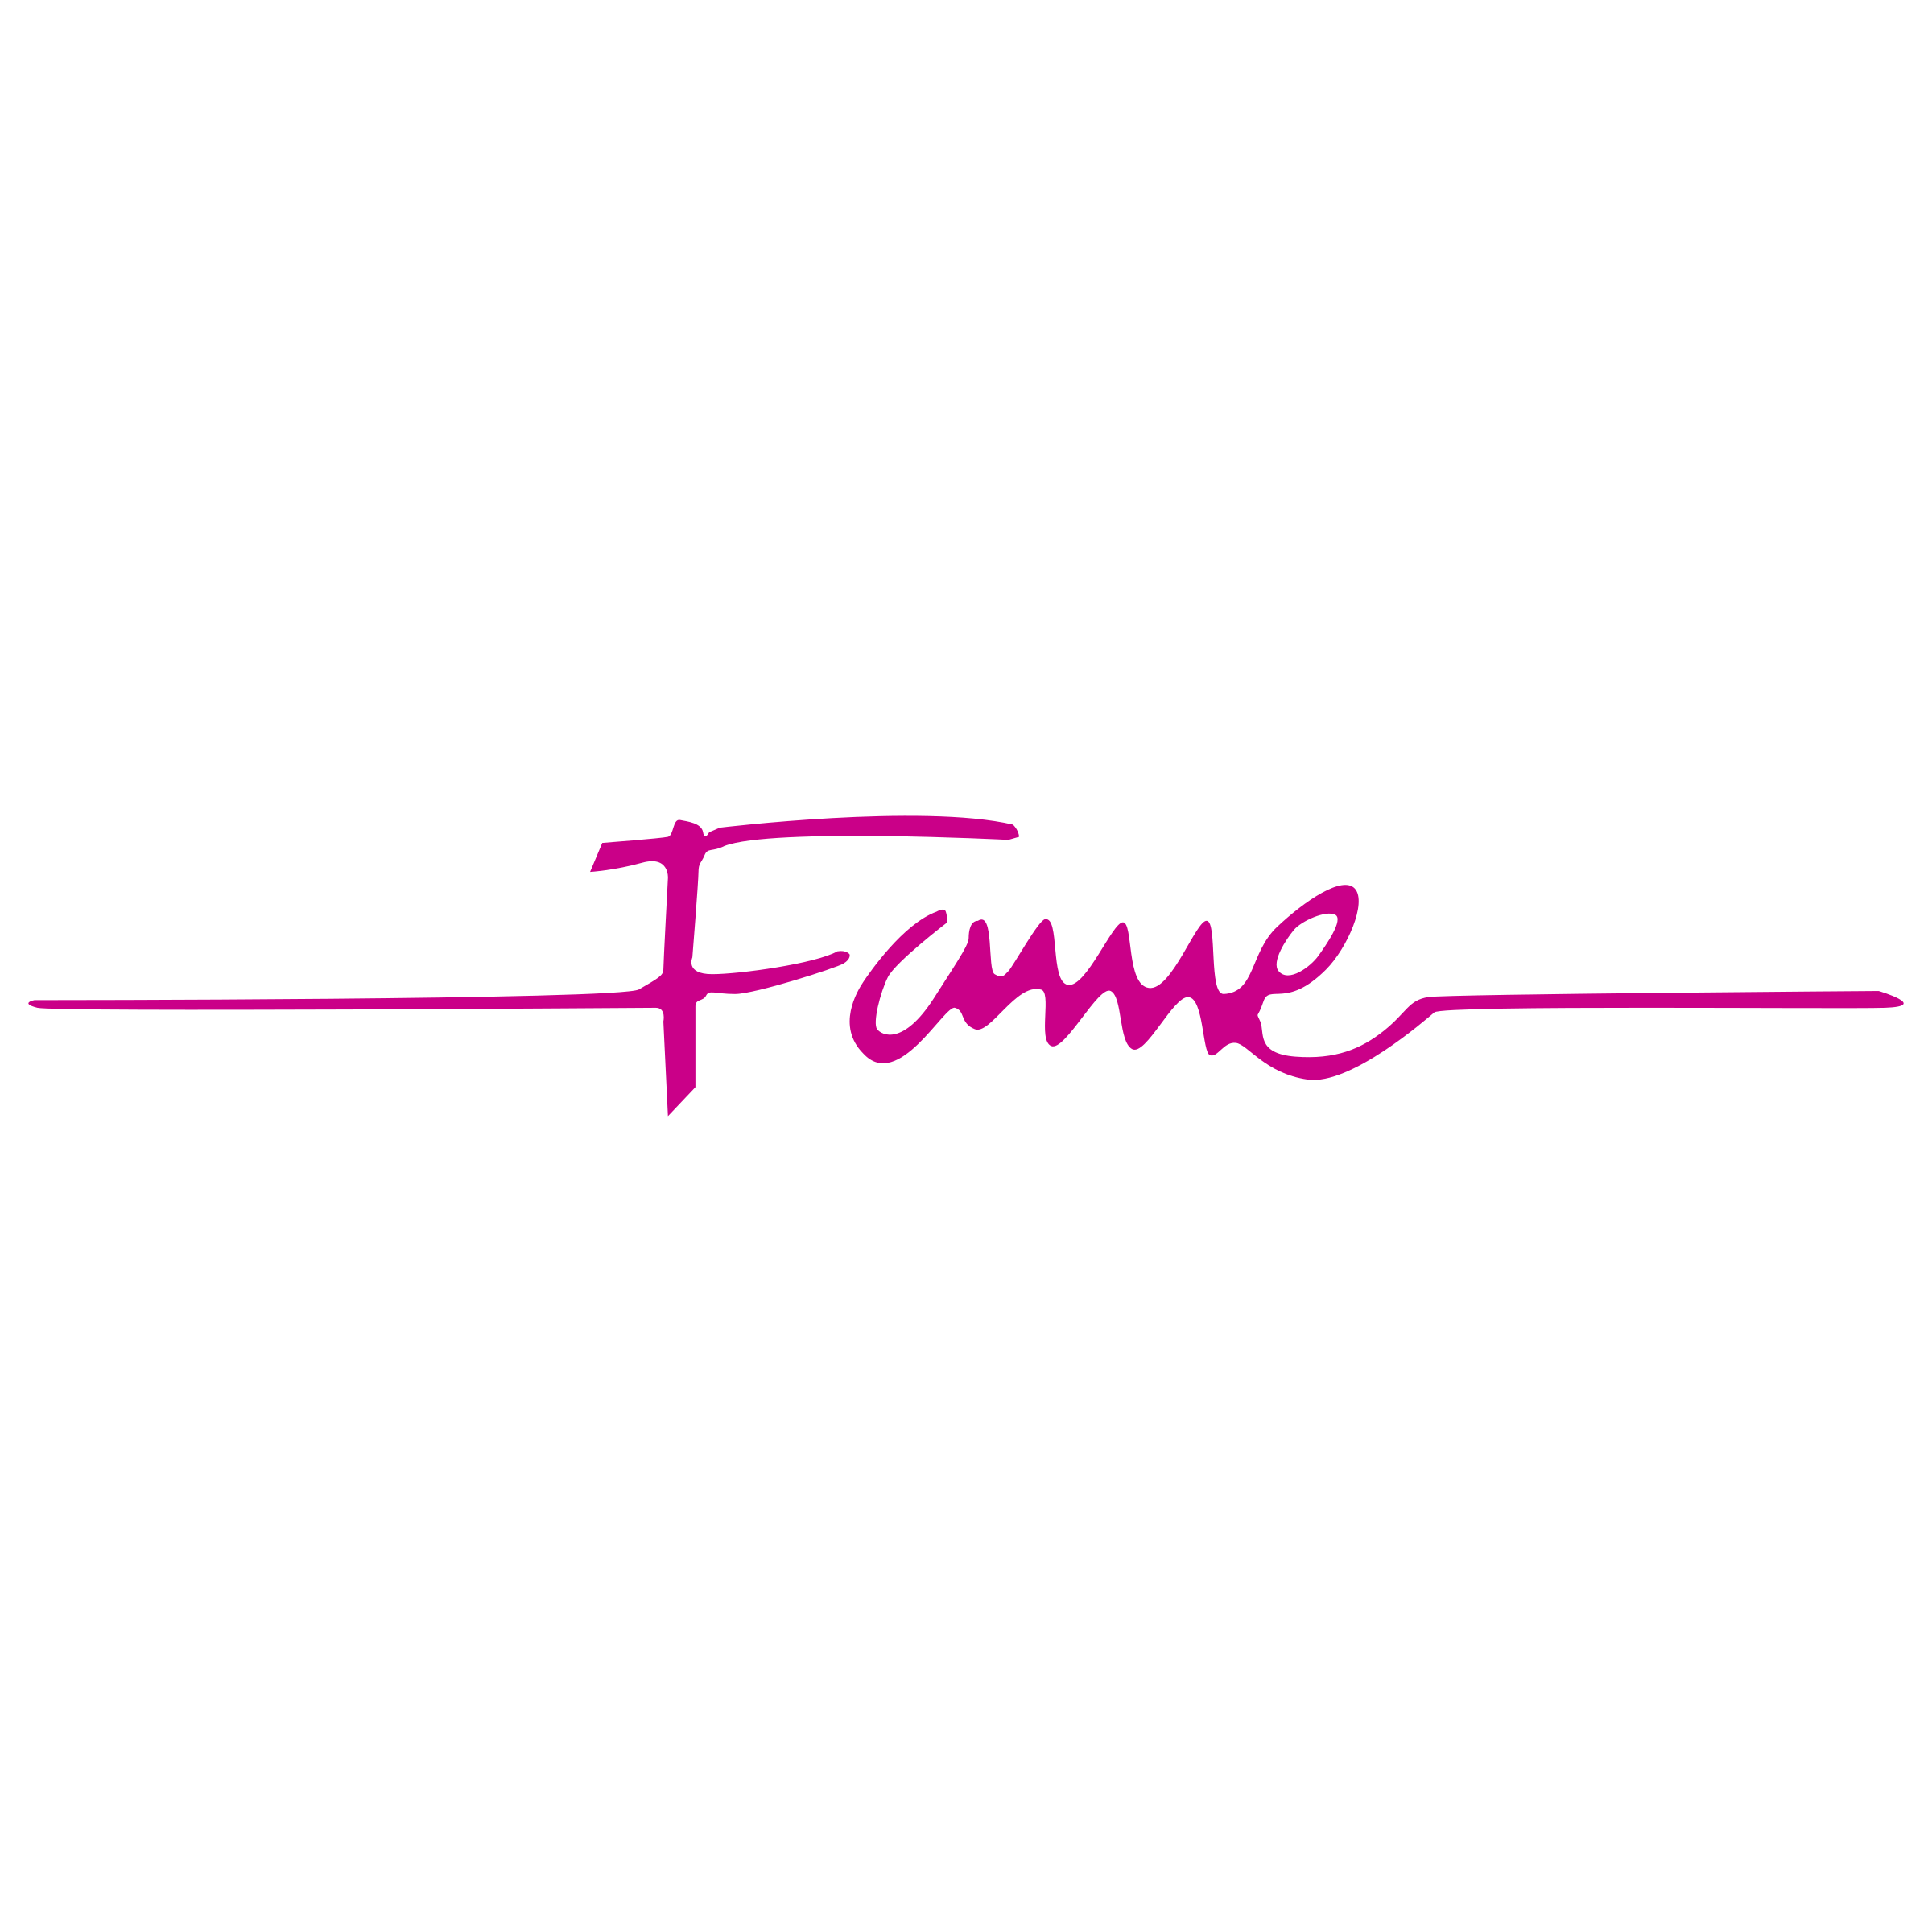 FAME Immagine PNG FREE